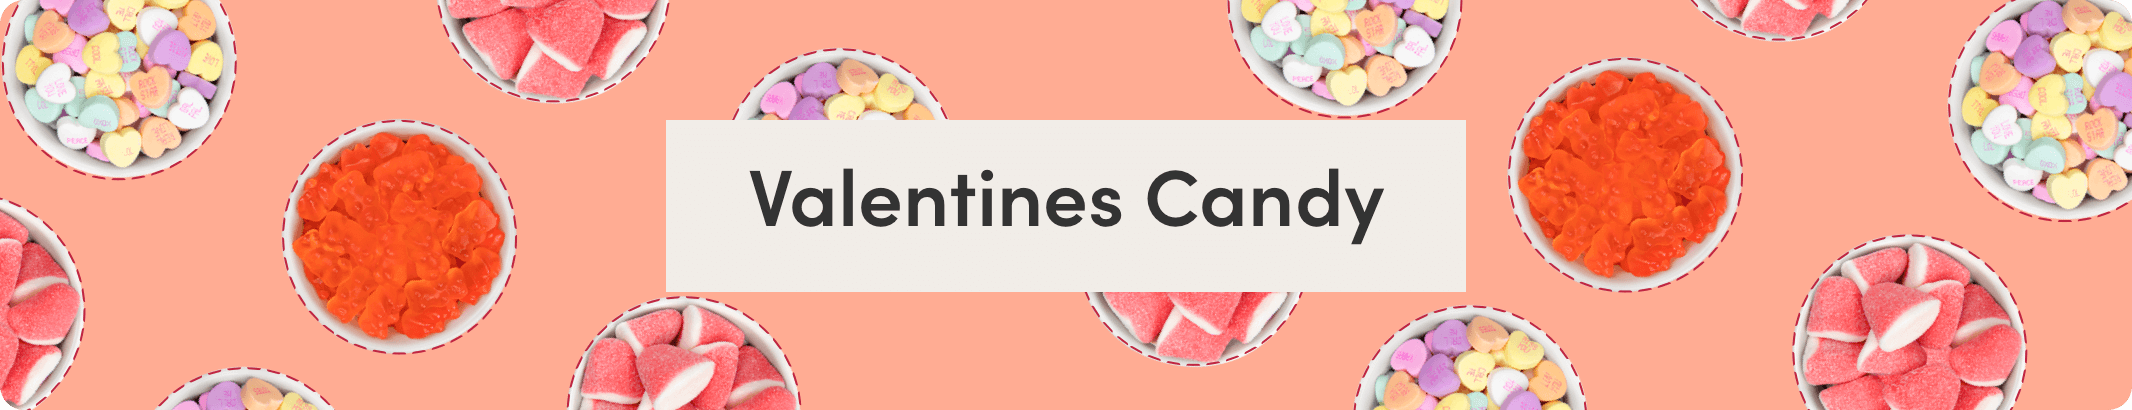 Valentines Candy